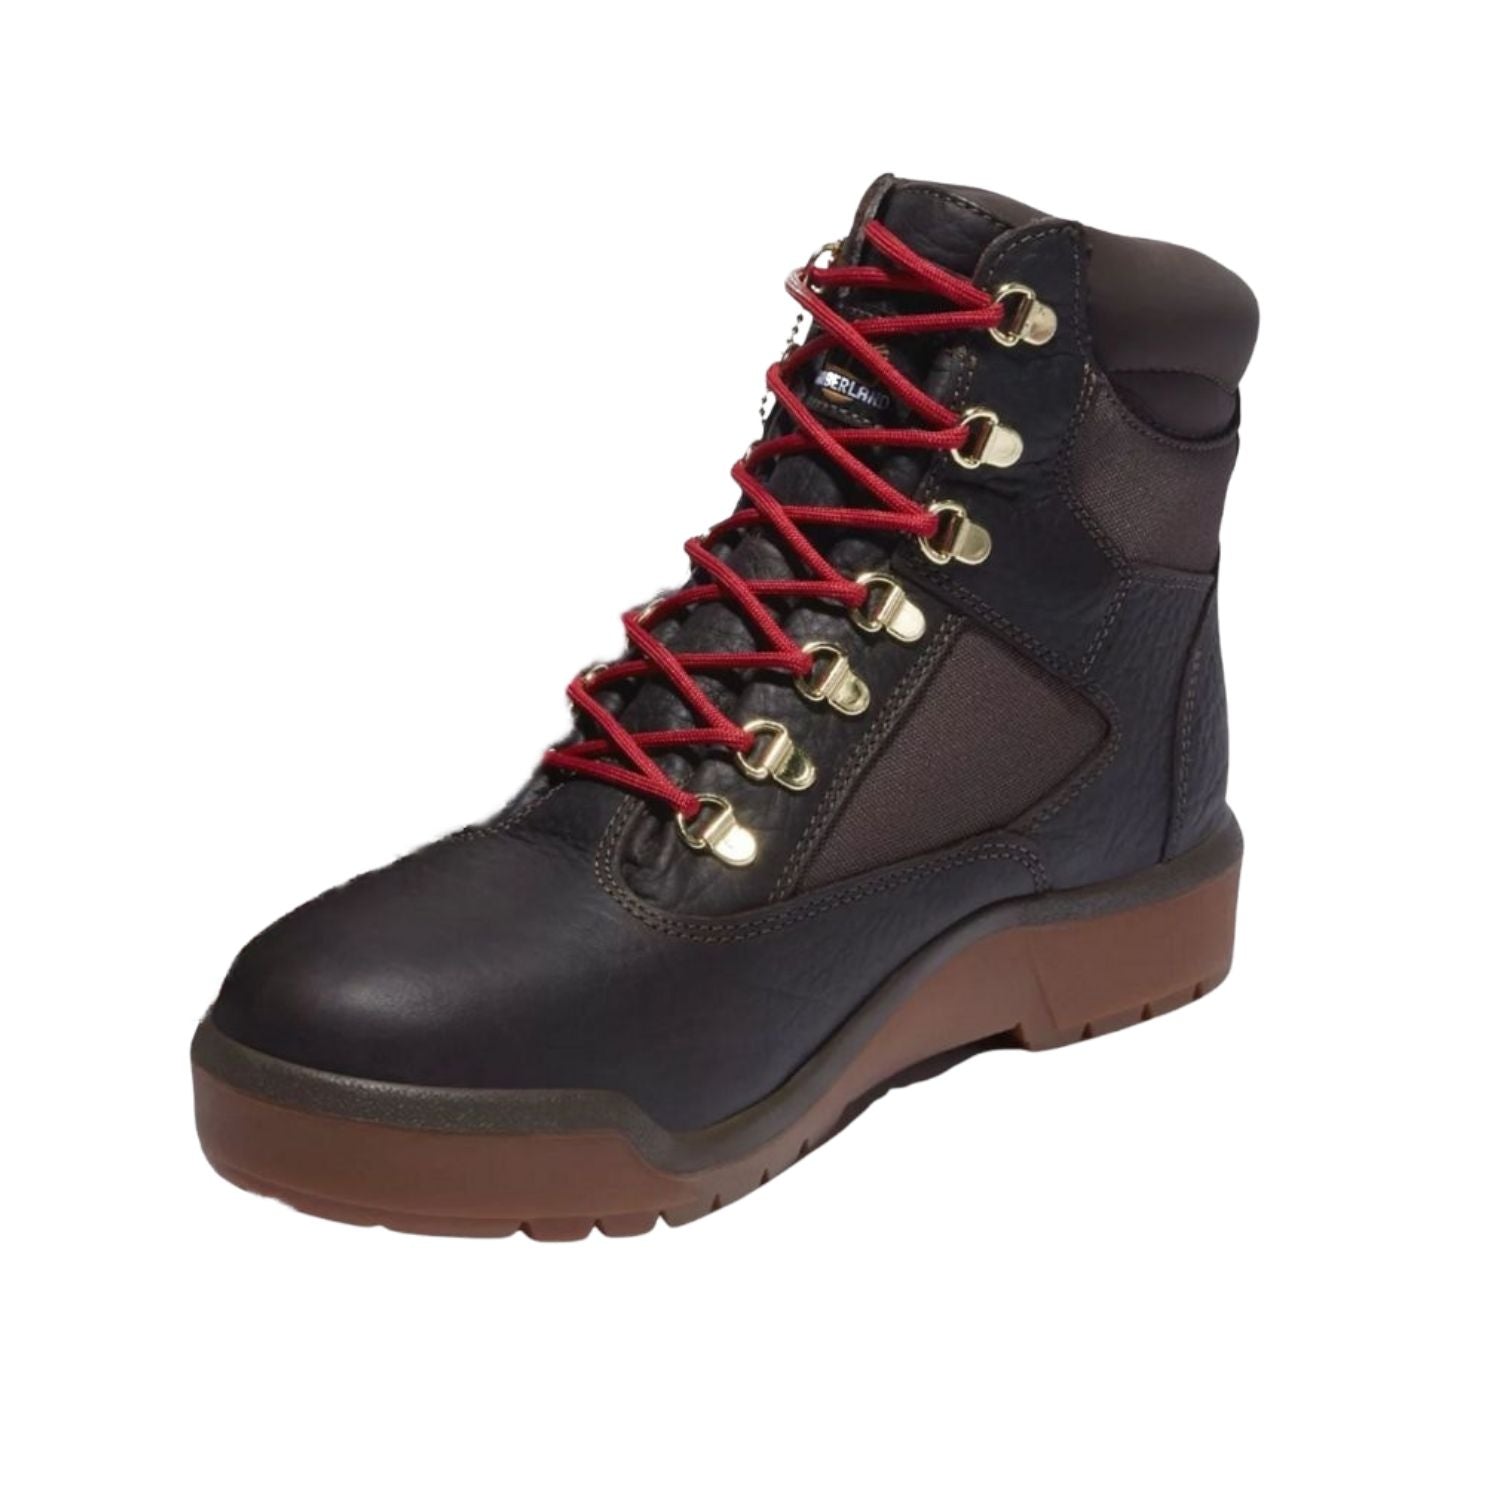 Timberland 6' Field Boot Mens Style : Tb0a2gk6